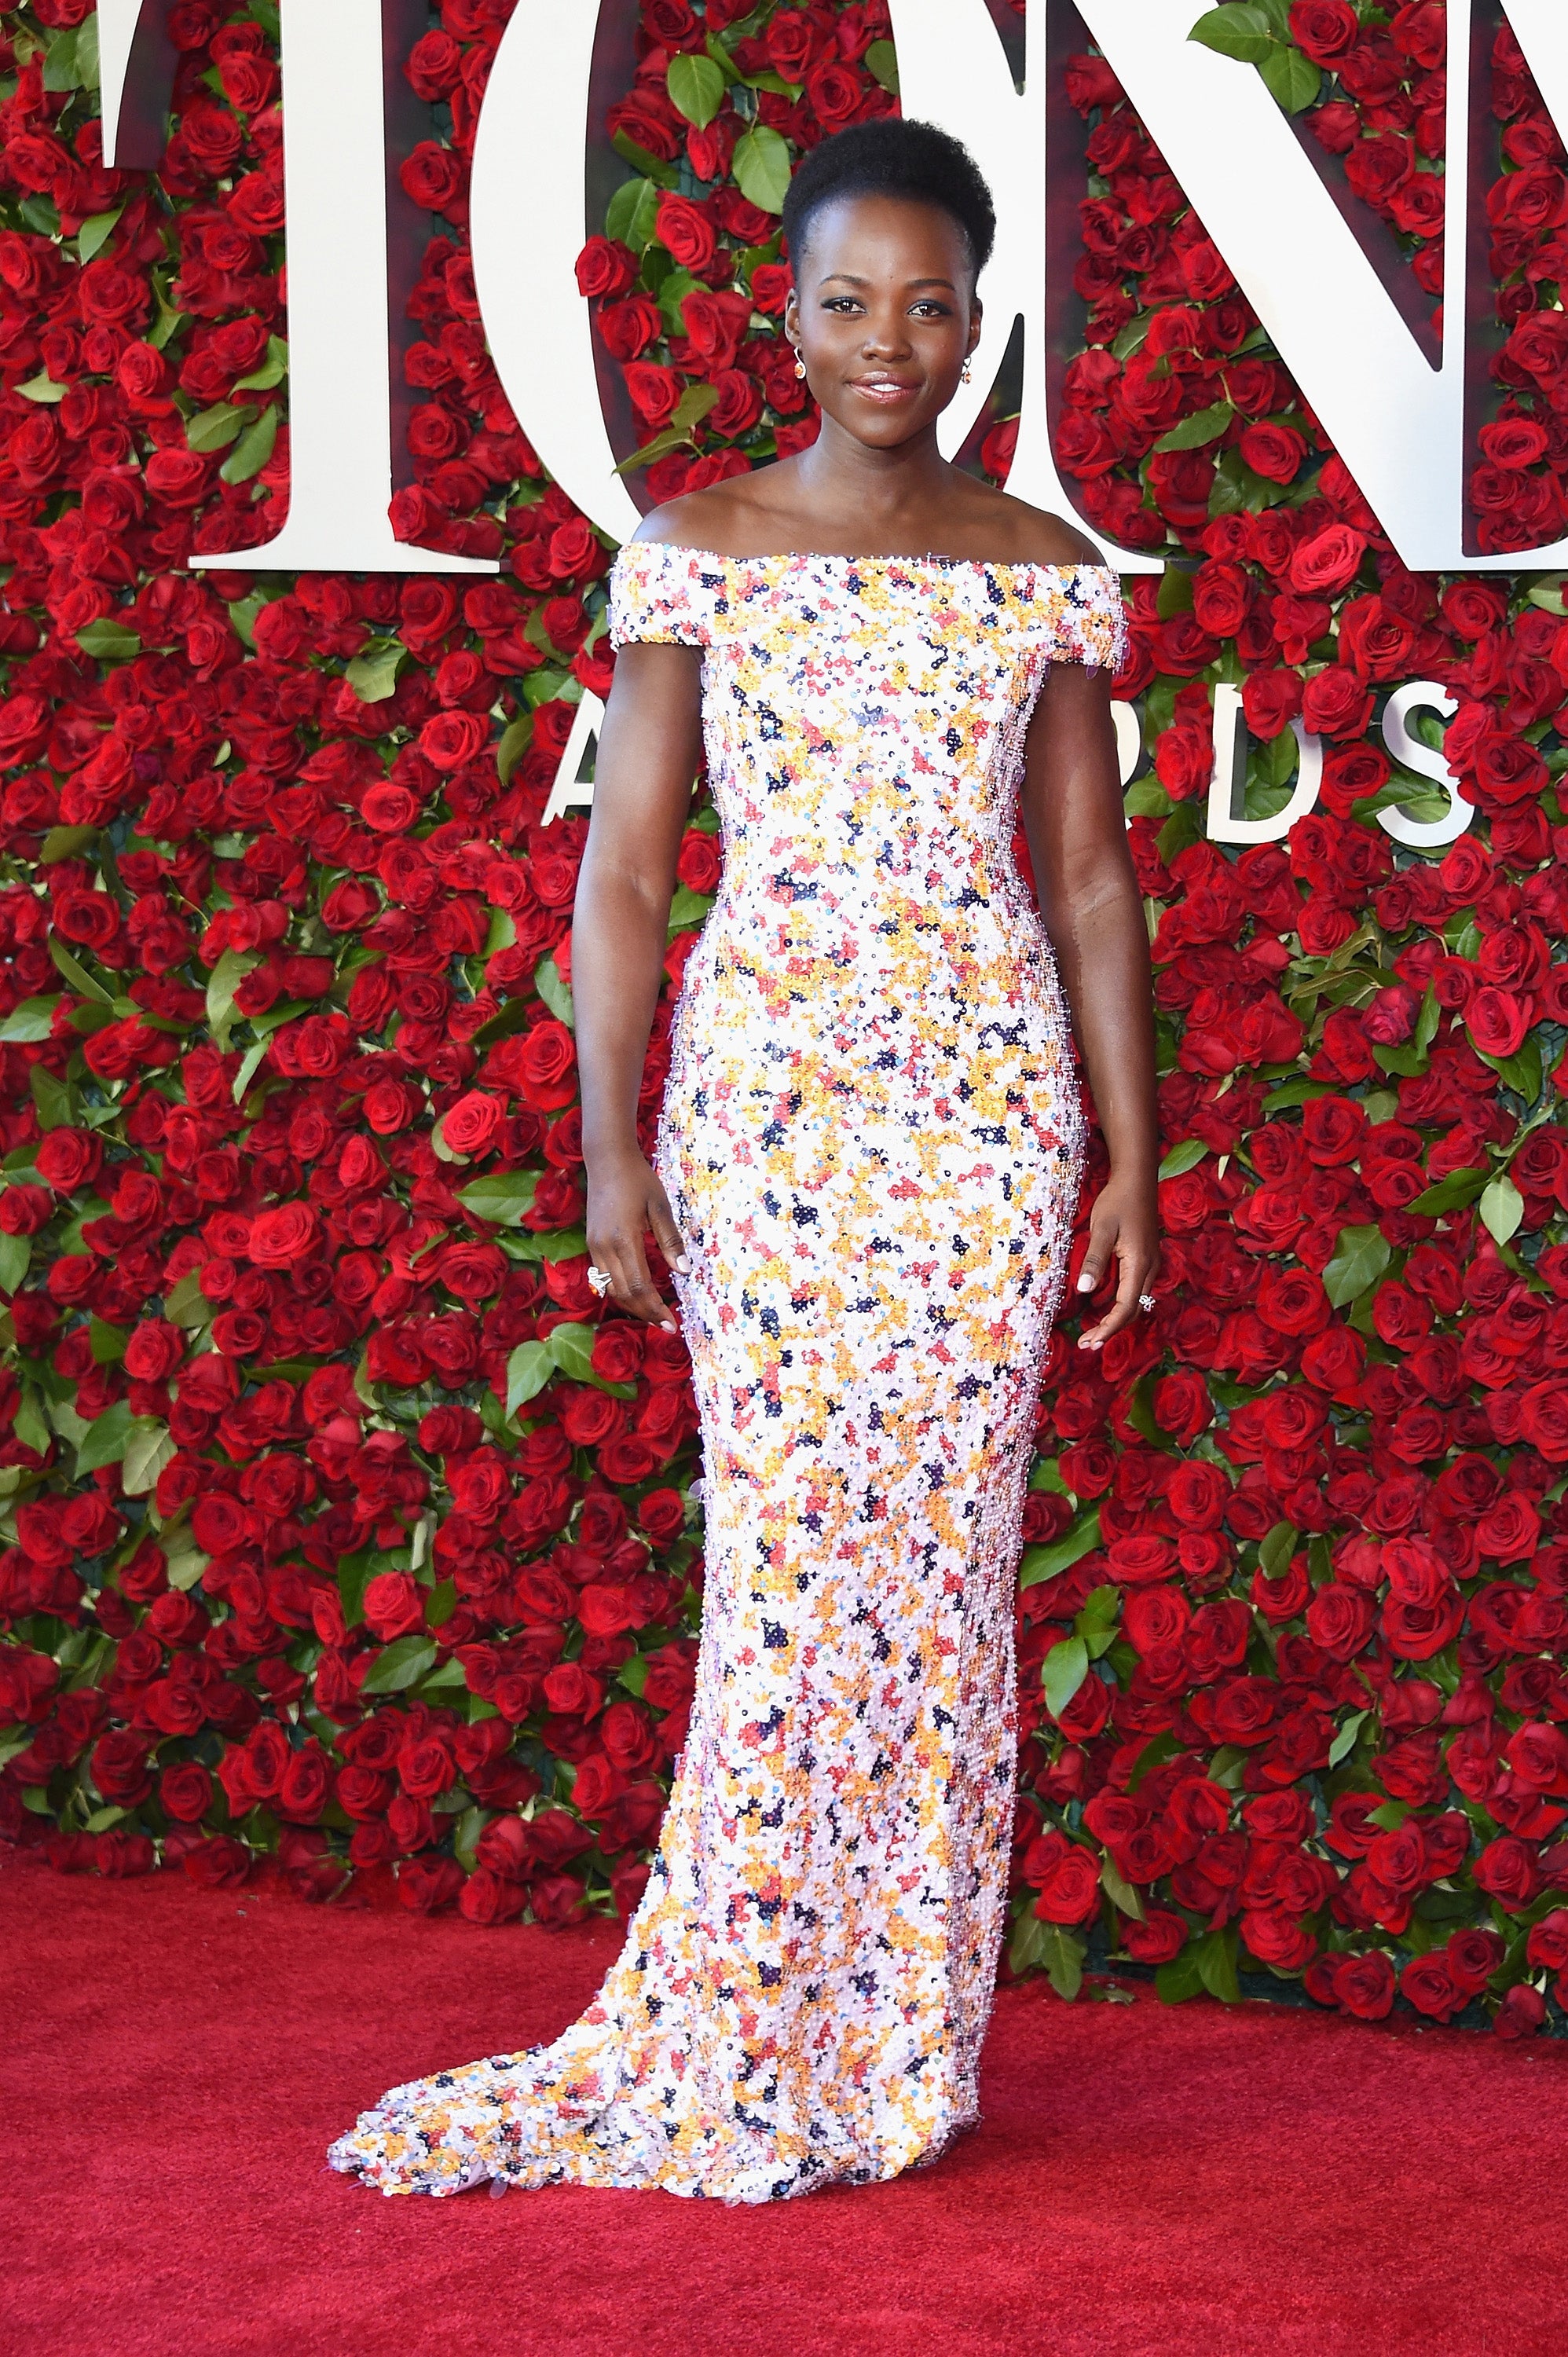 The 2016 Tony Awards: All The Show-Stopping Looks
